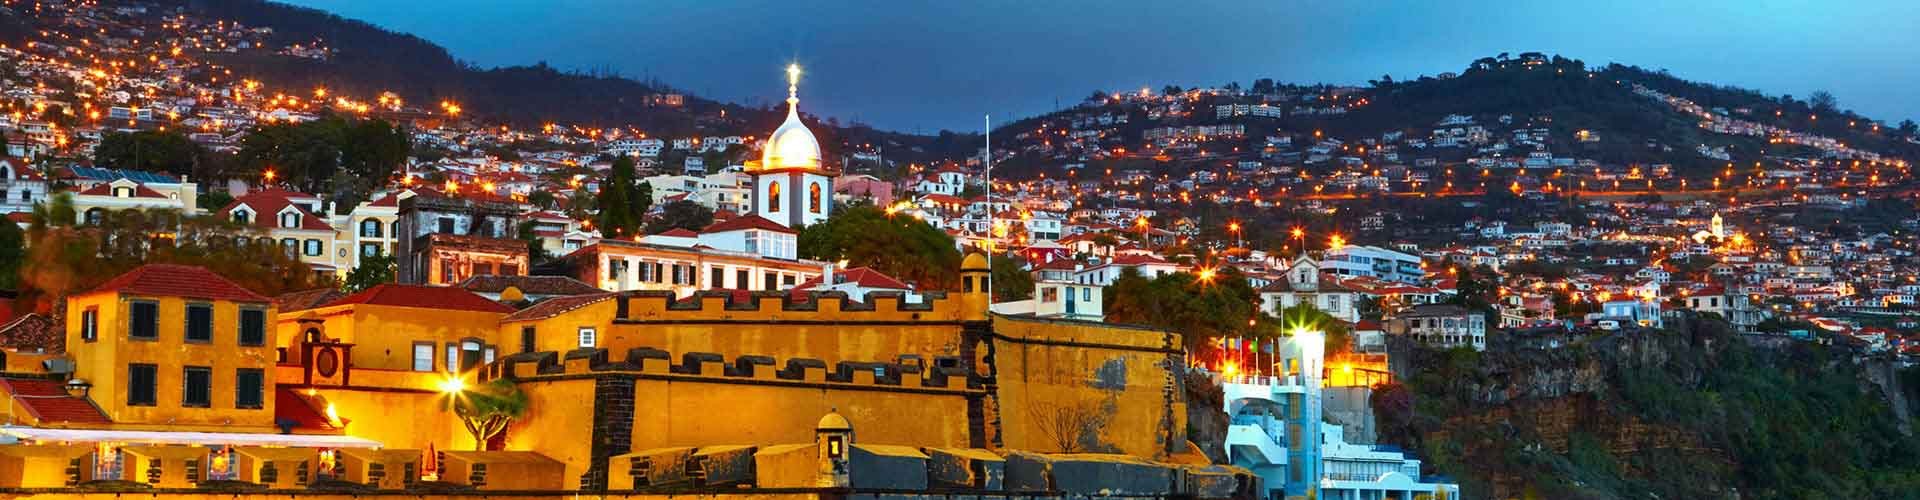 Funchal Historical Itinerary- Museums in Funchal